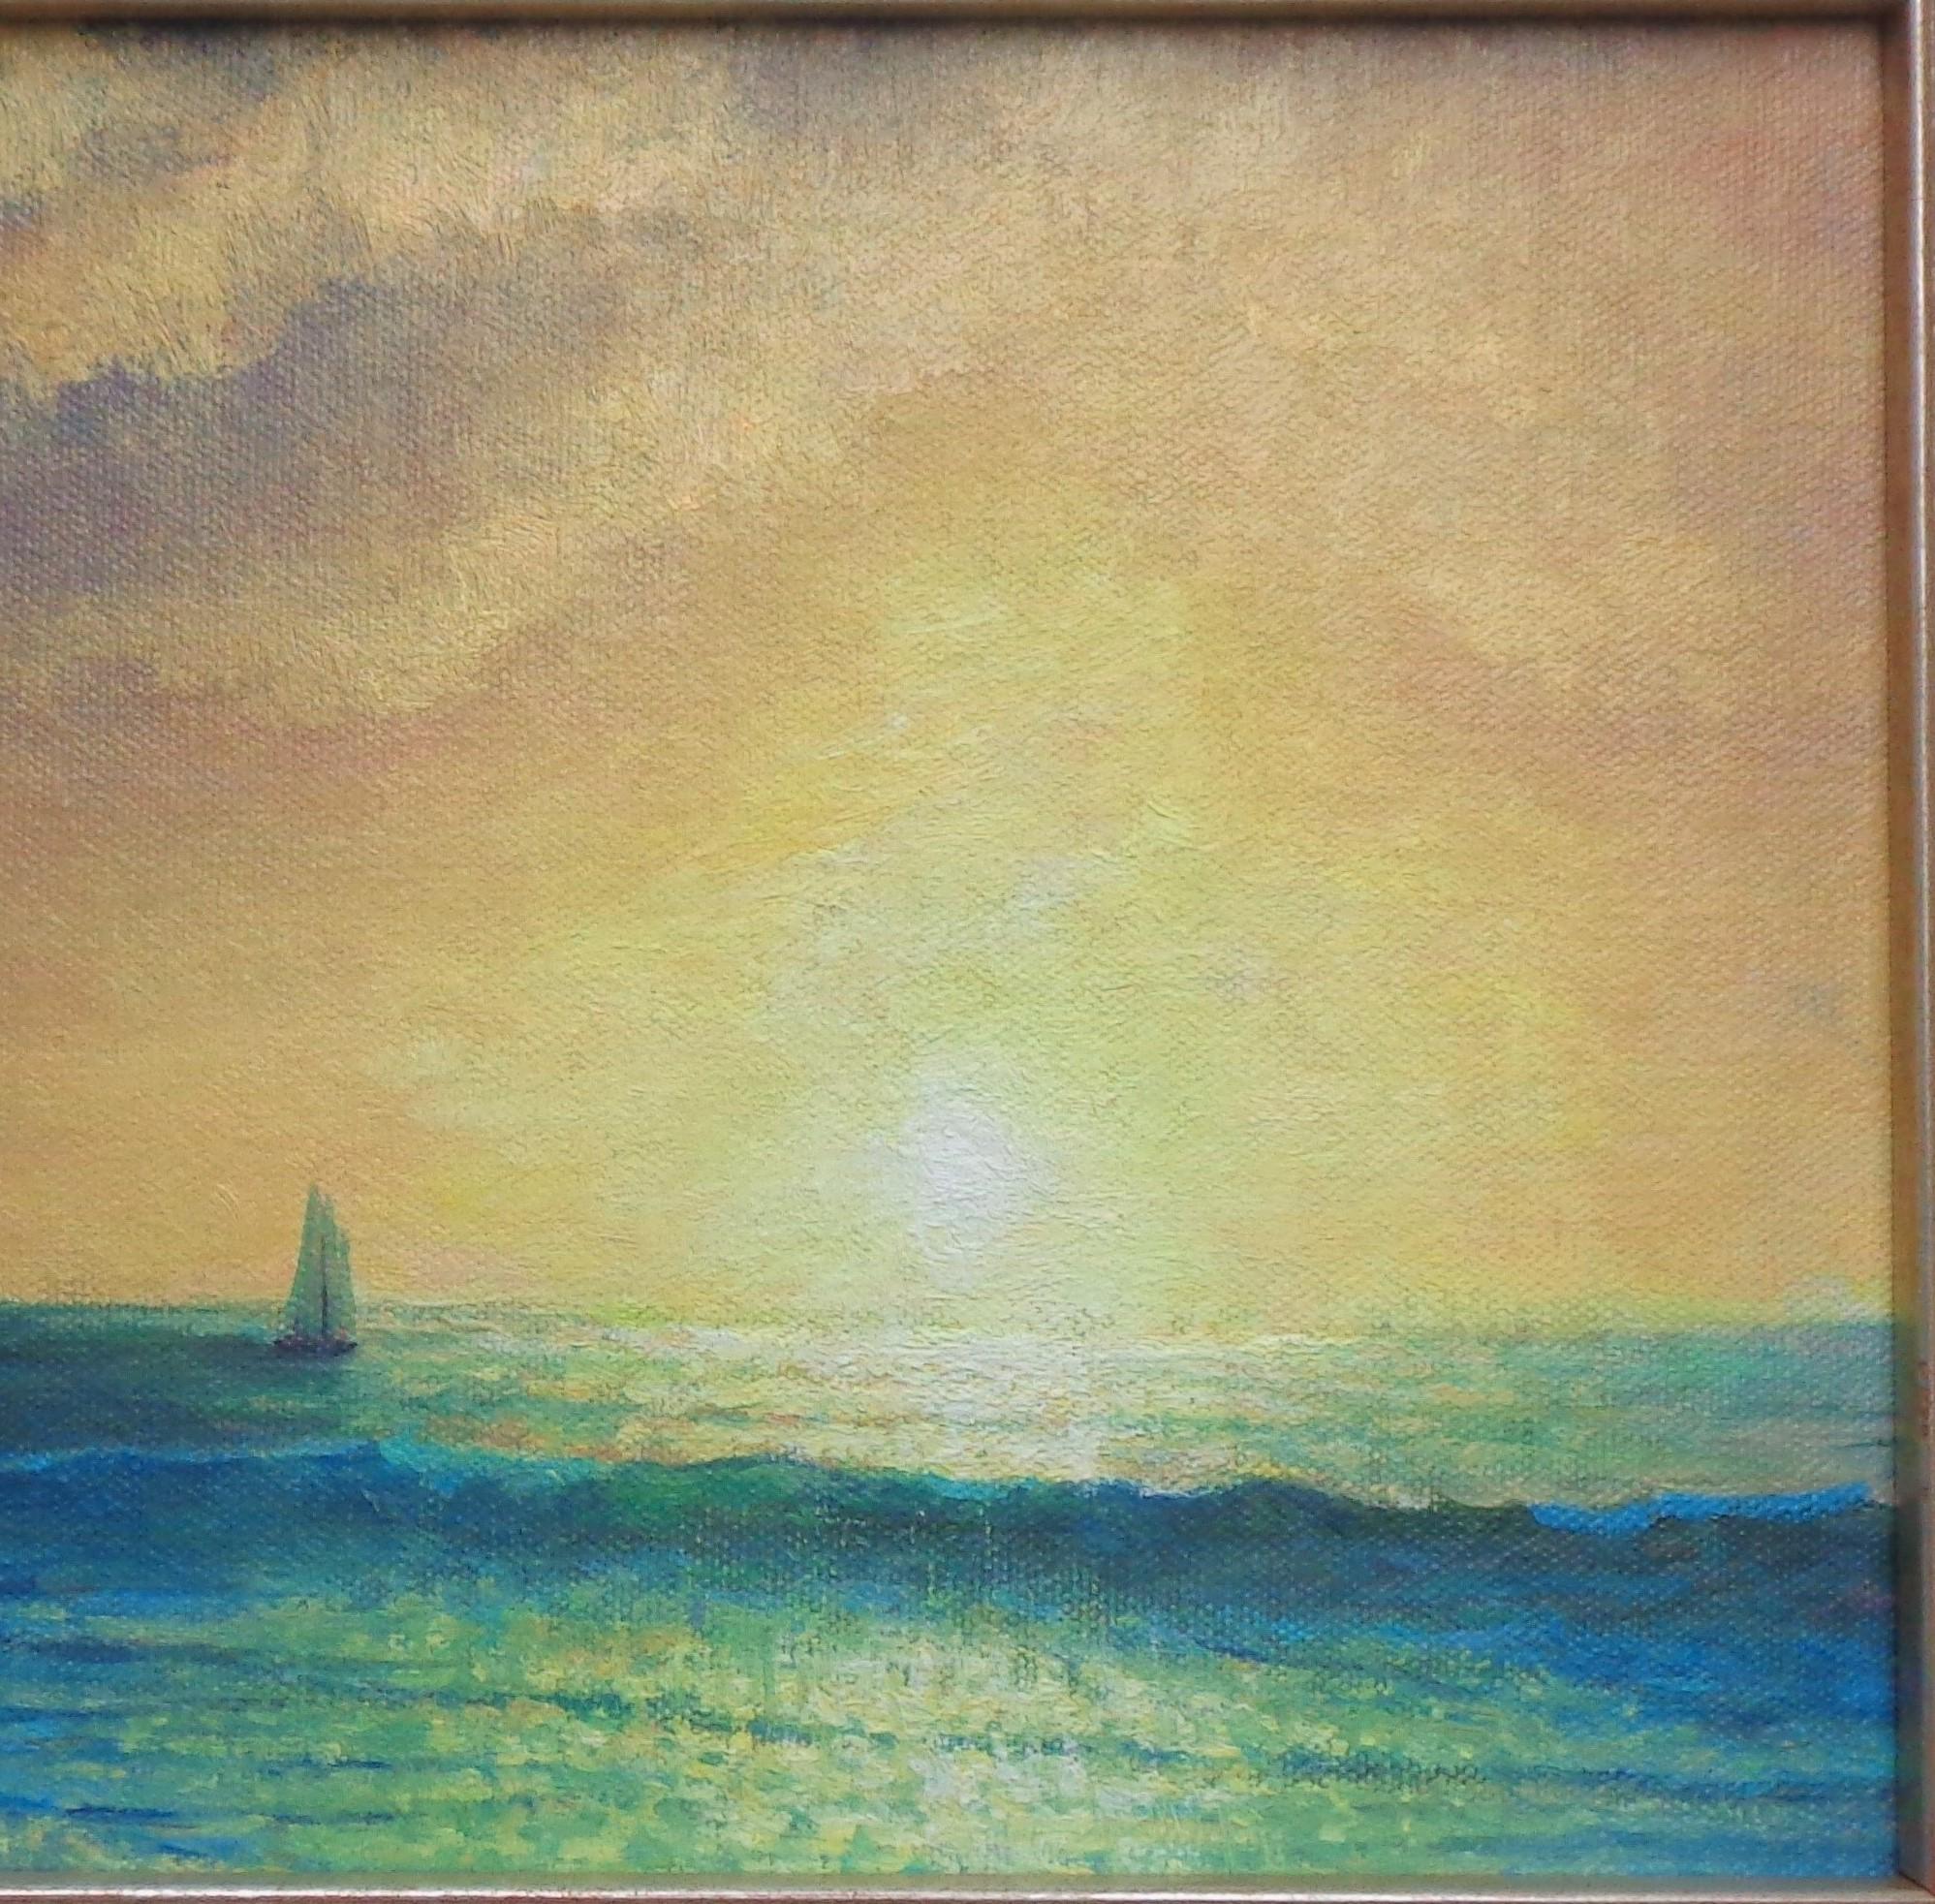 Sunrise Seascape is an oil painting on panel by Chesterfield NJ artist Michael Budden framed in original frame.. Image is 8 x 12 unframed.
ARTIST'S STATEMENT
I have been in the art business as an artist and dealer since the early 80's. Almost 40